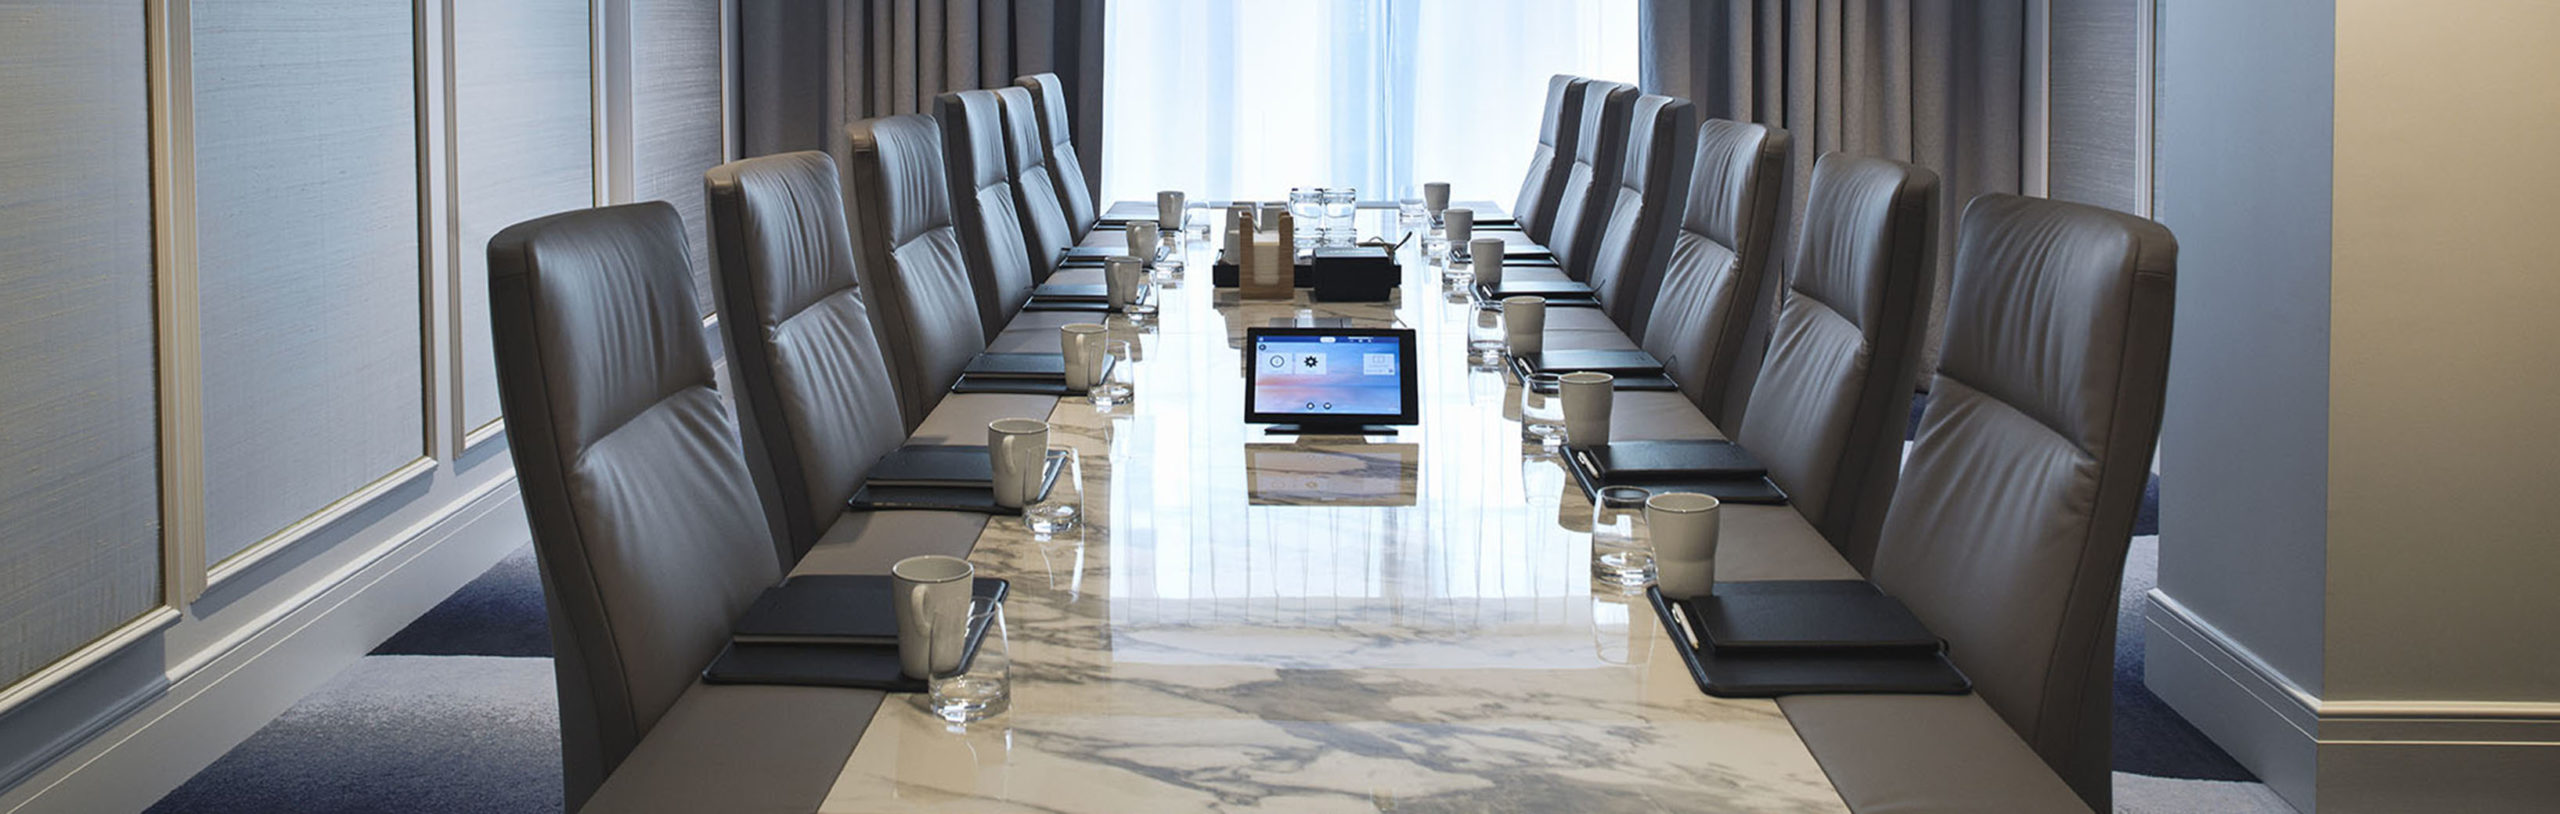 Blanka meeting room with long marble table and conference chairs